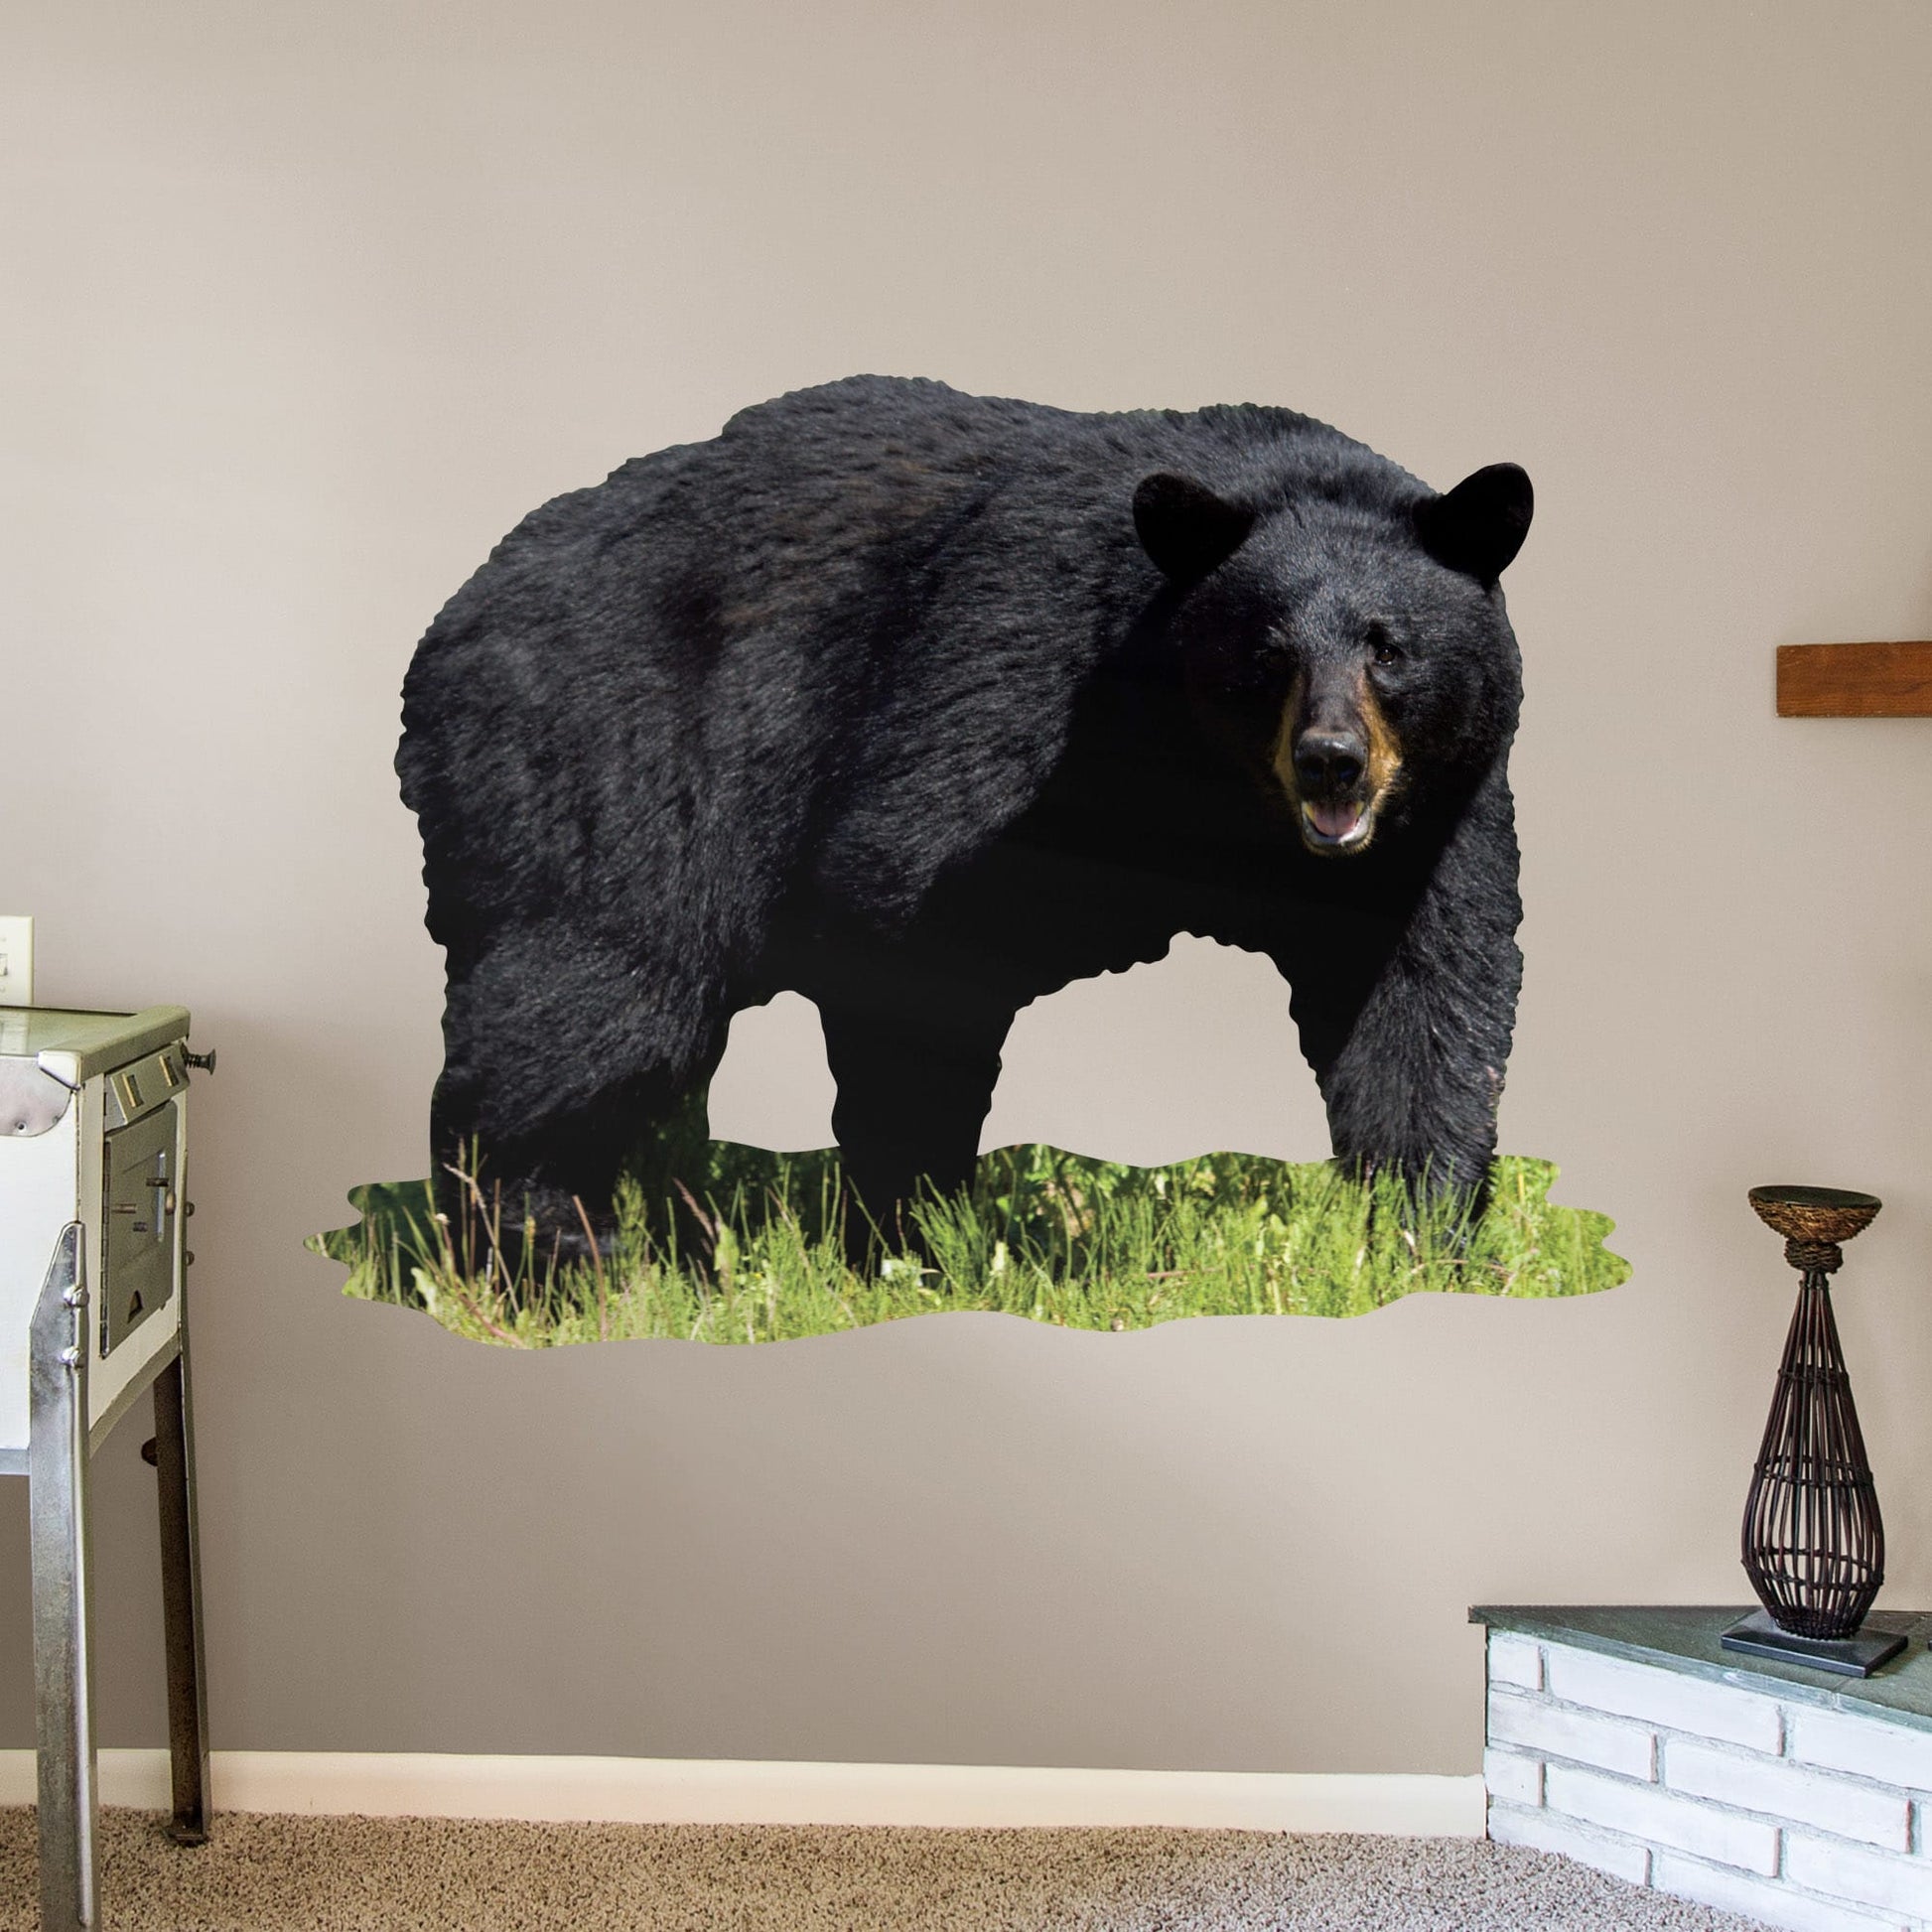 Giant Animal + 2 Decals (48"W x 35"H)